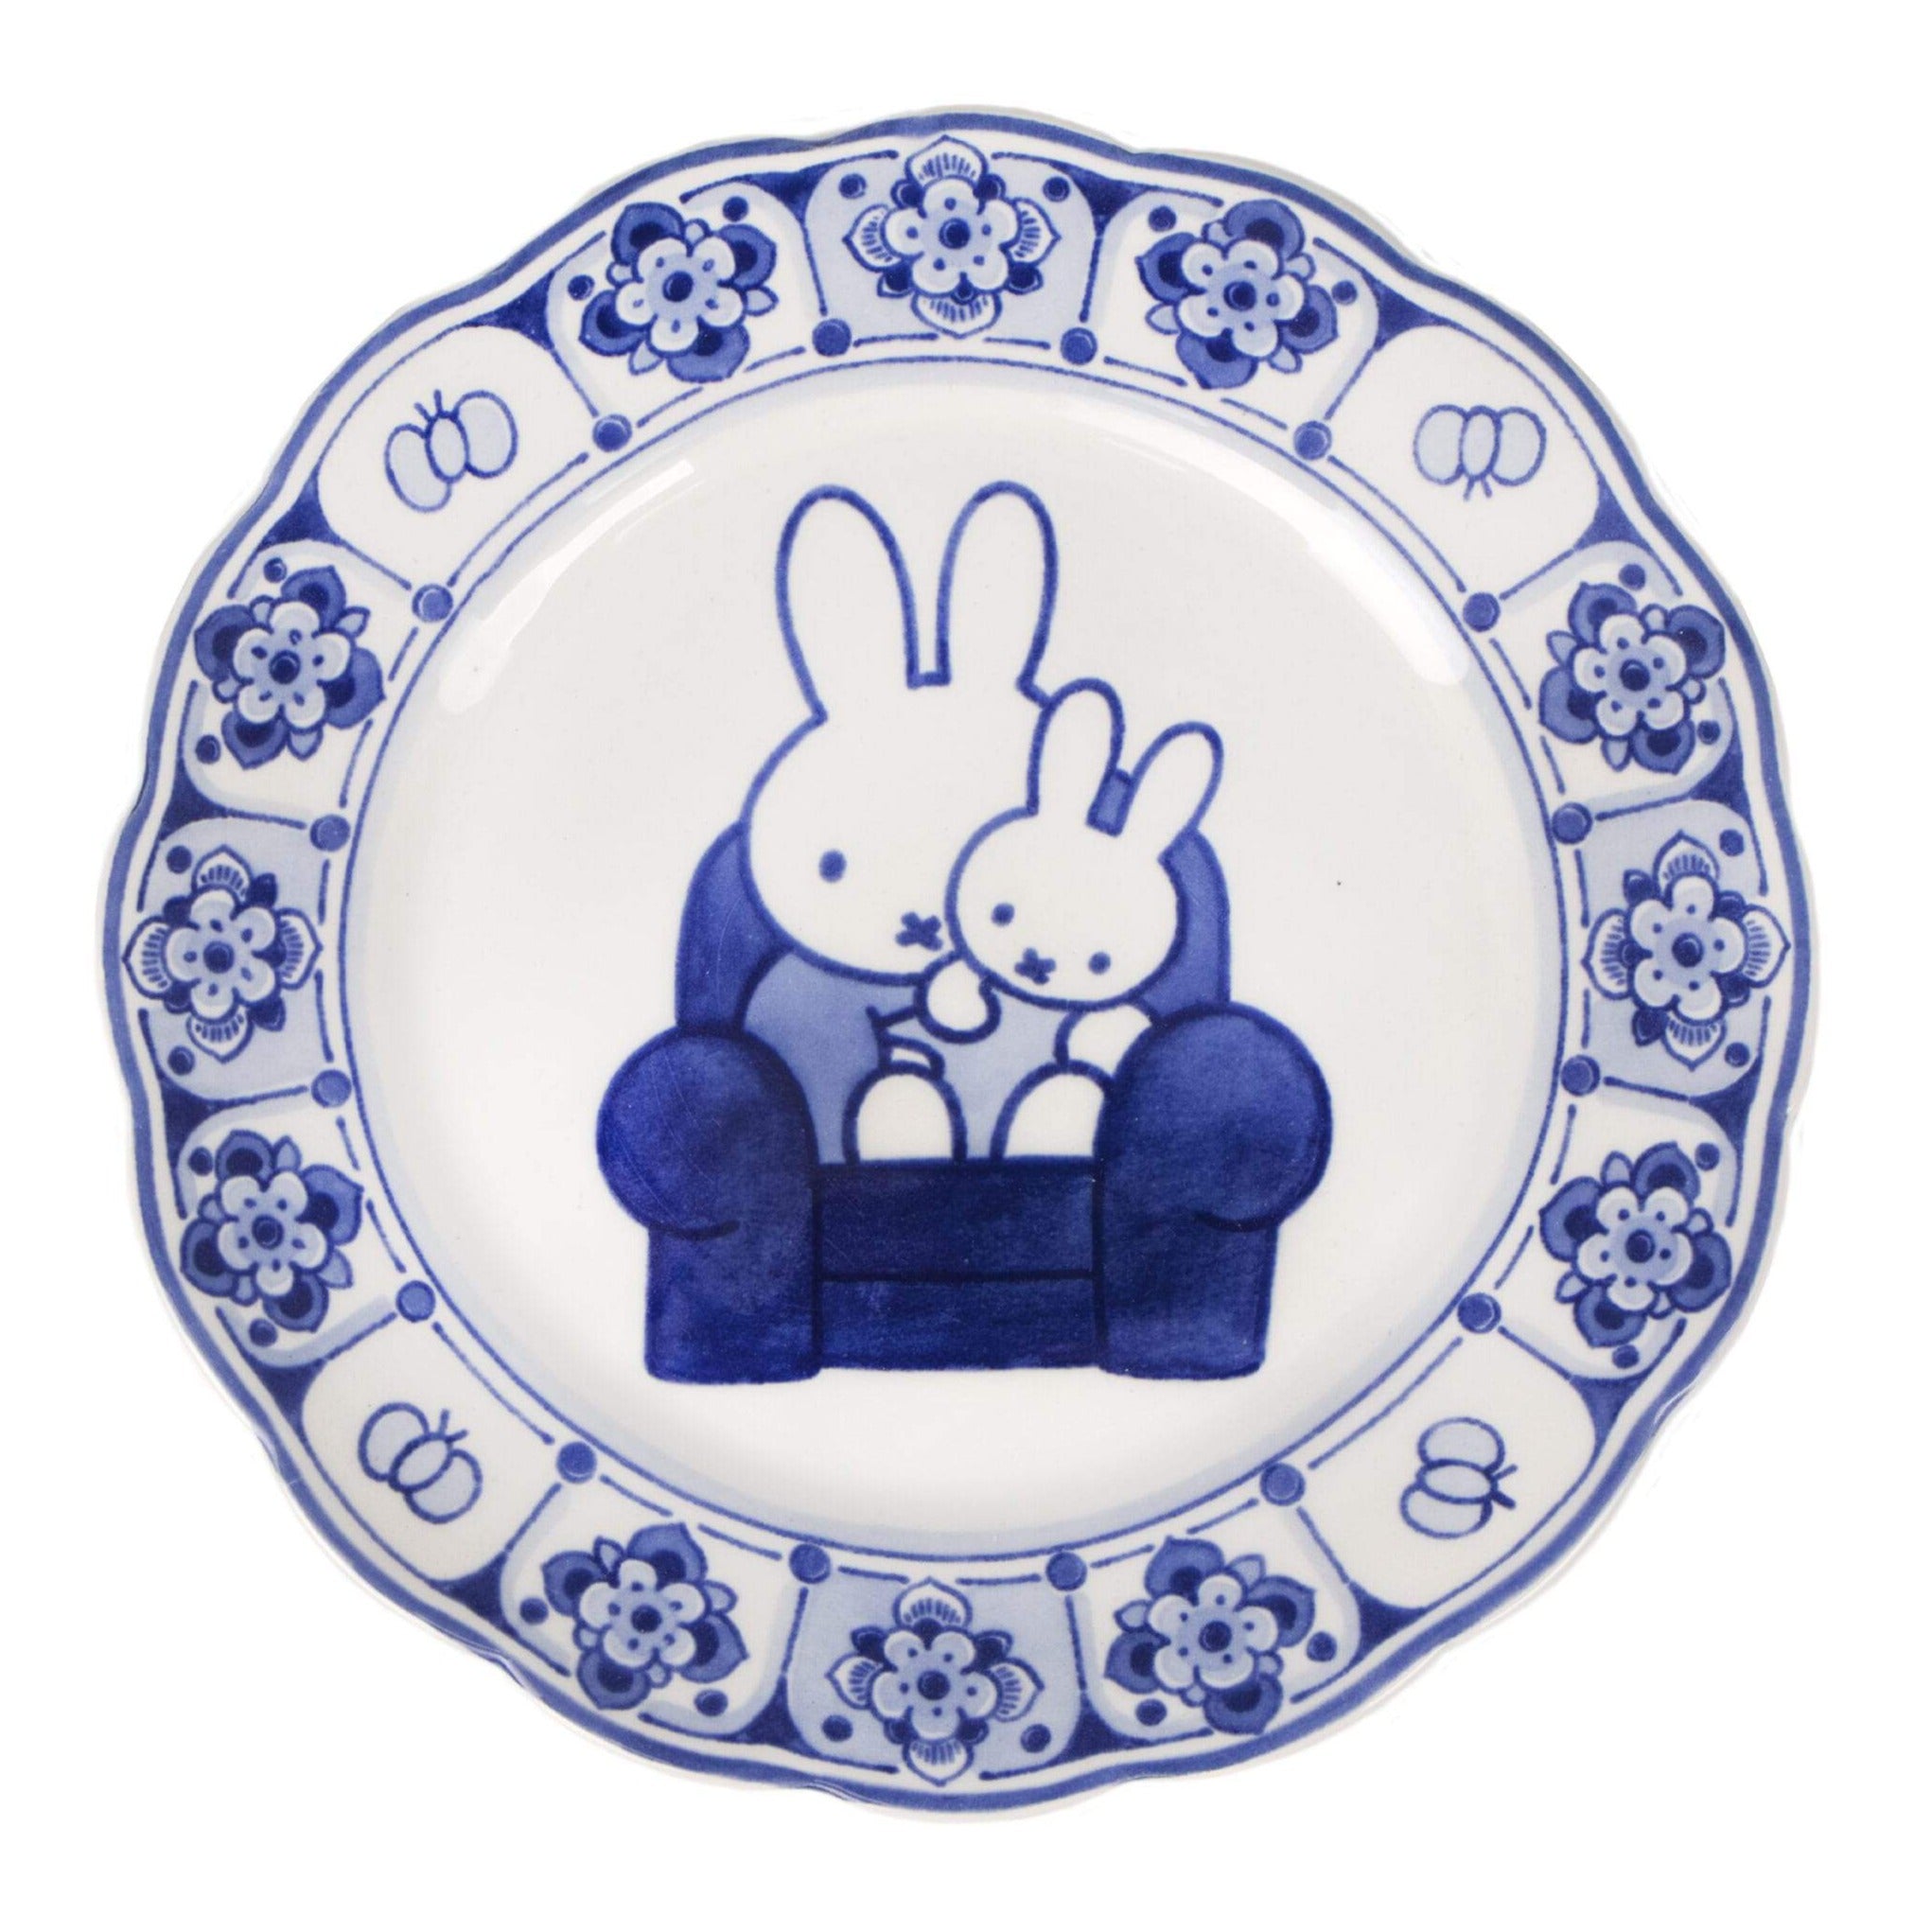 Terugbetaling schoolbord Occlusie Miffy Decorative Plate Delft Blue by Royal Delft | zillymonkey